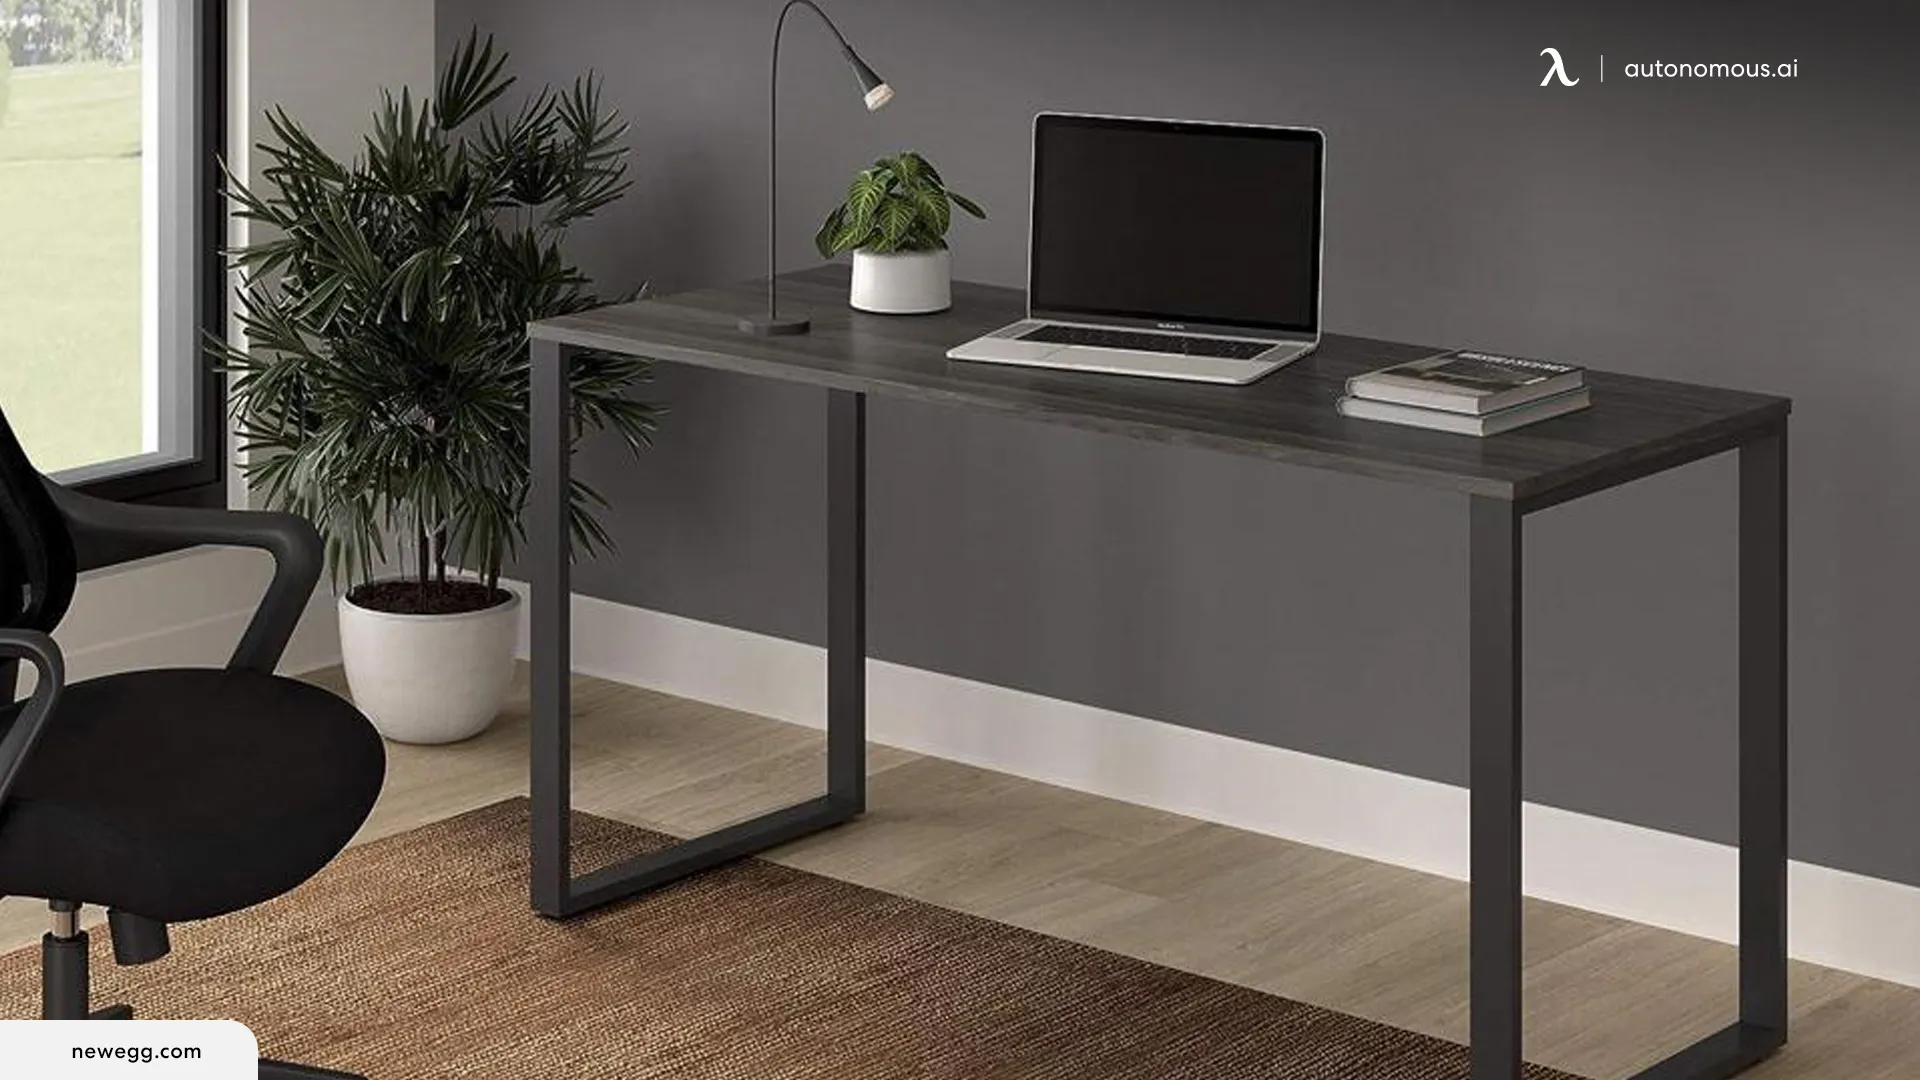 Size of Your Workspace - commercial grade desk